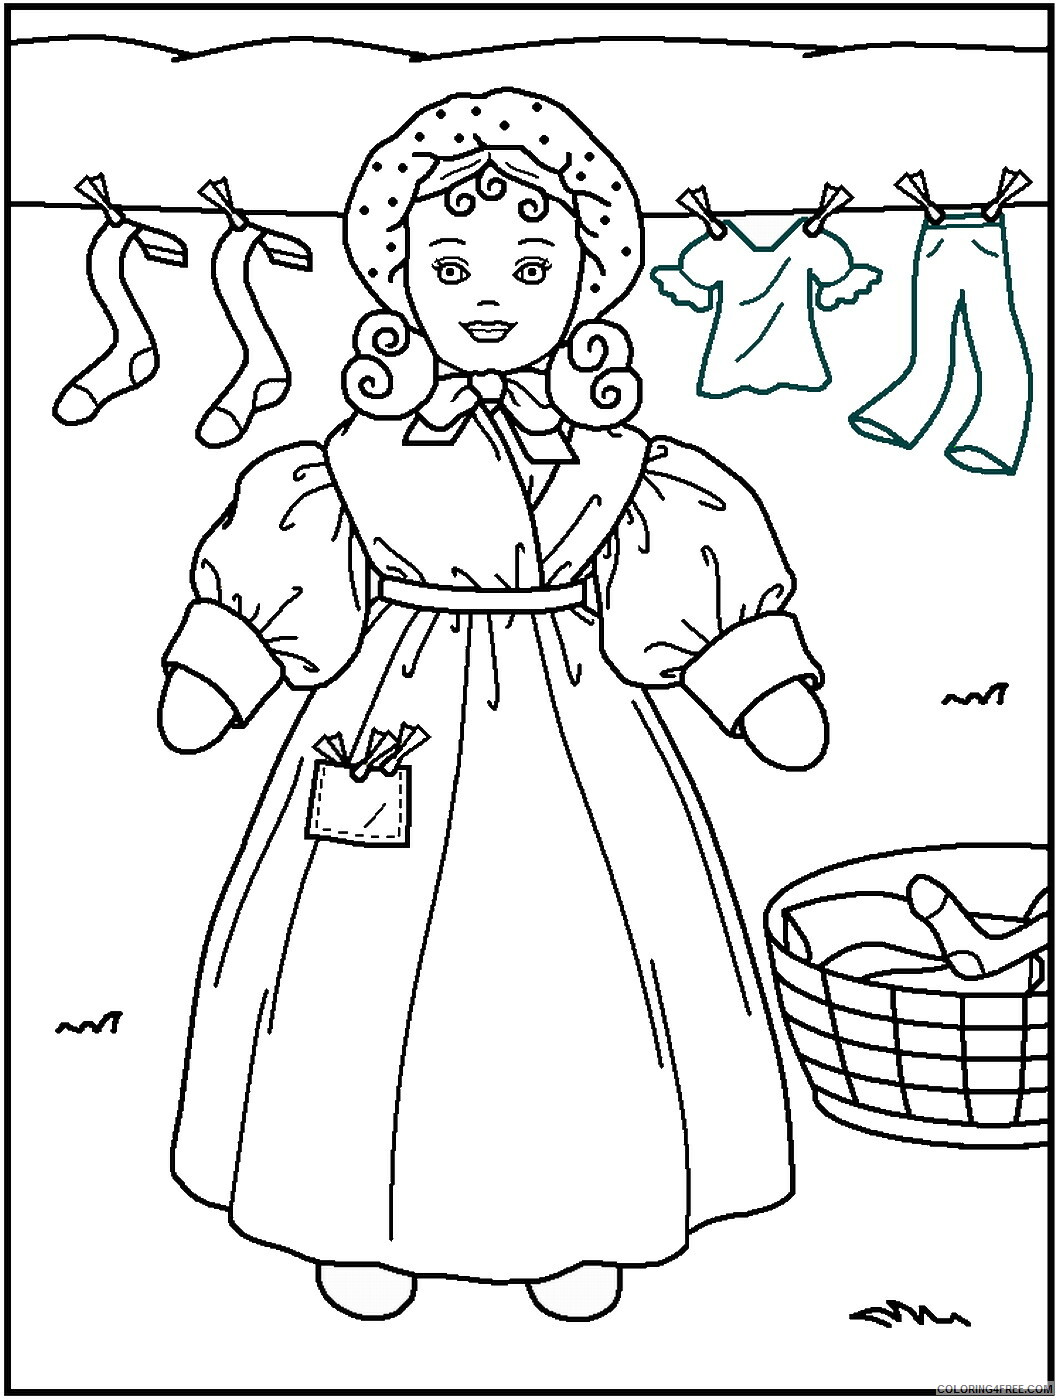 Doll Coloring Pages for Girls dolls_48 Printable 2021 0385 Coloring4free